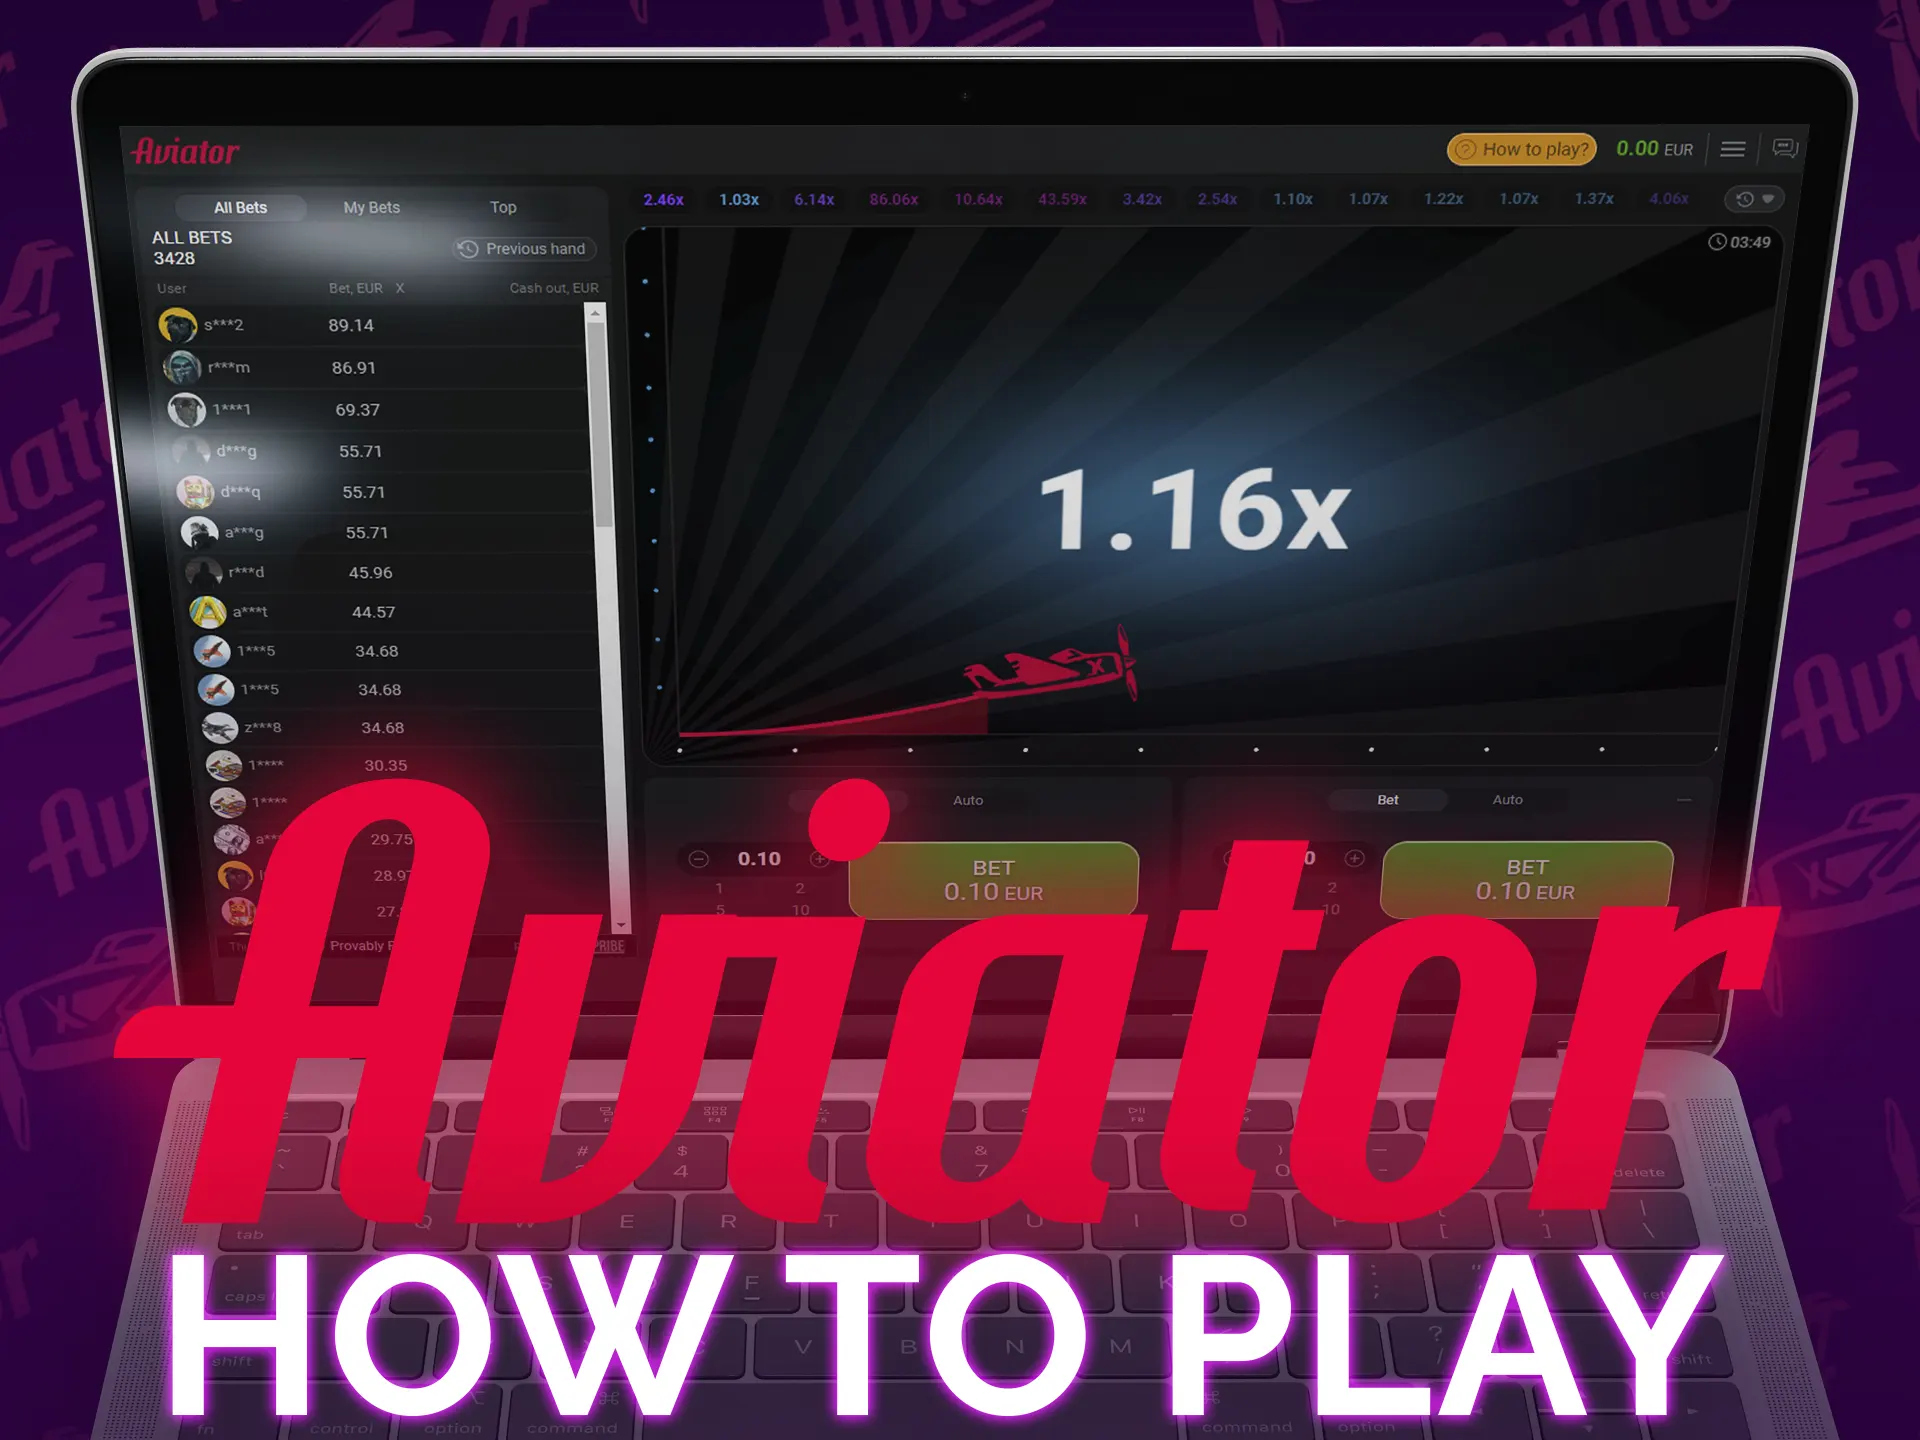 Play Aviator by following these simple steps.